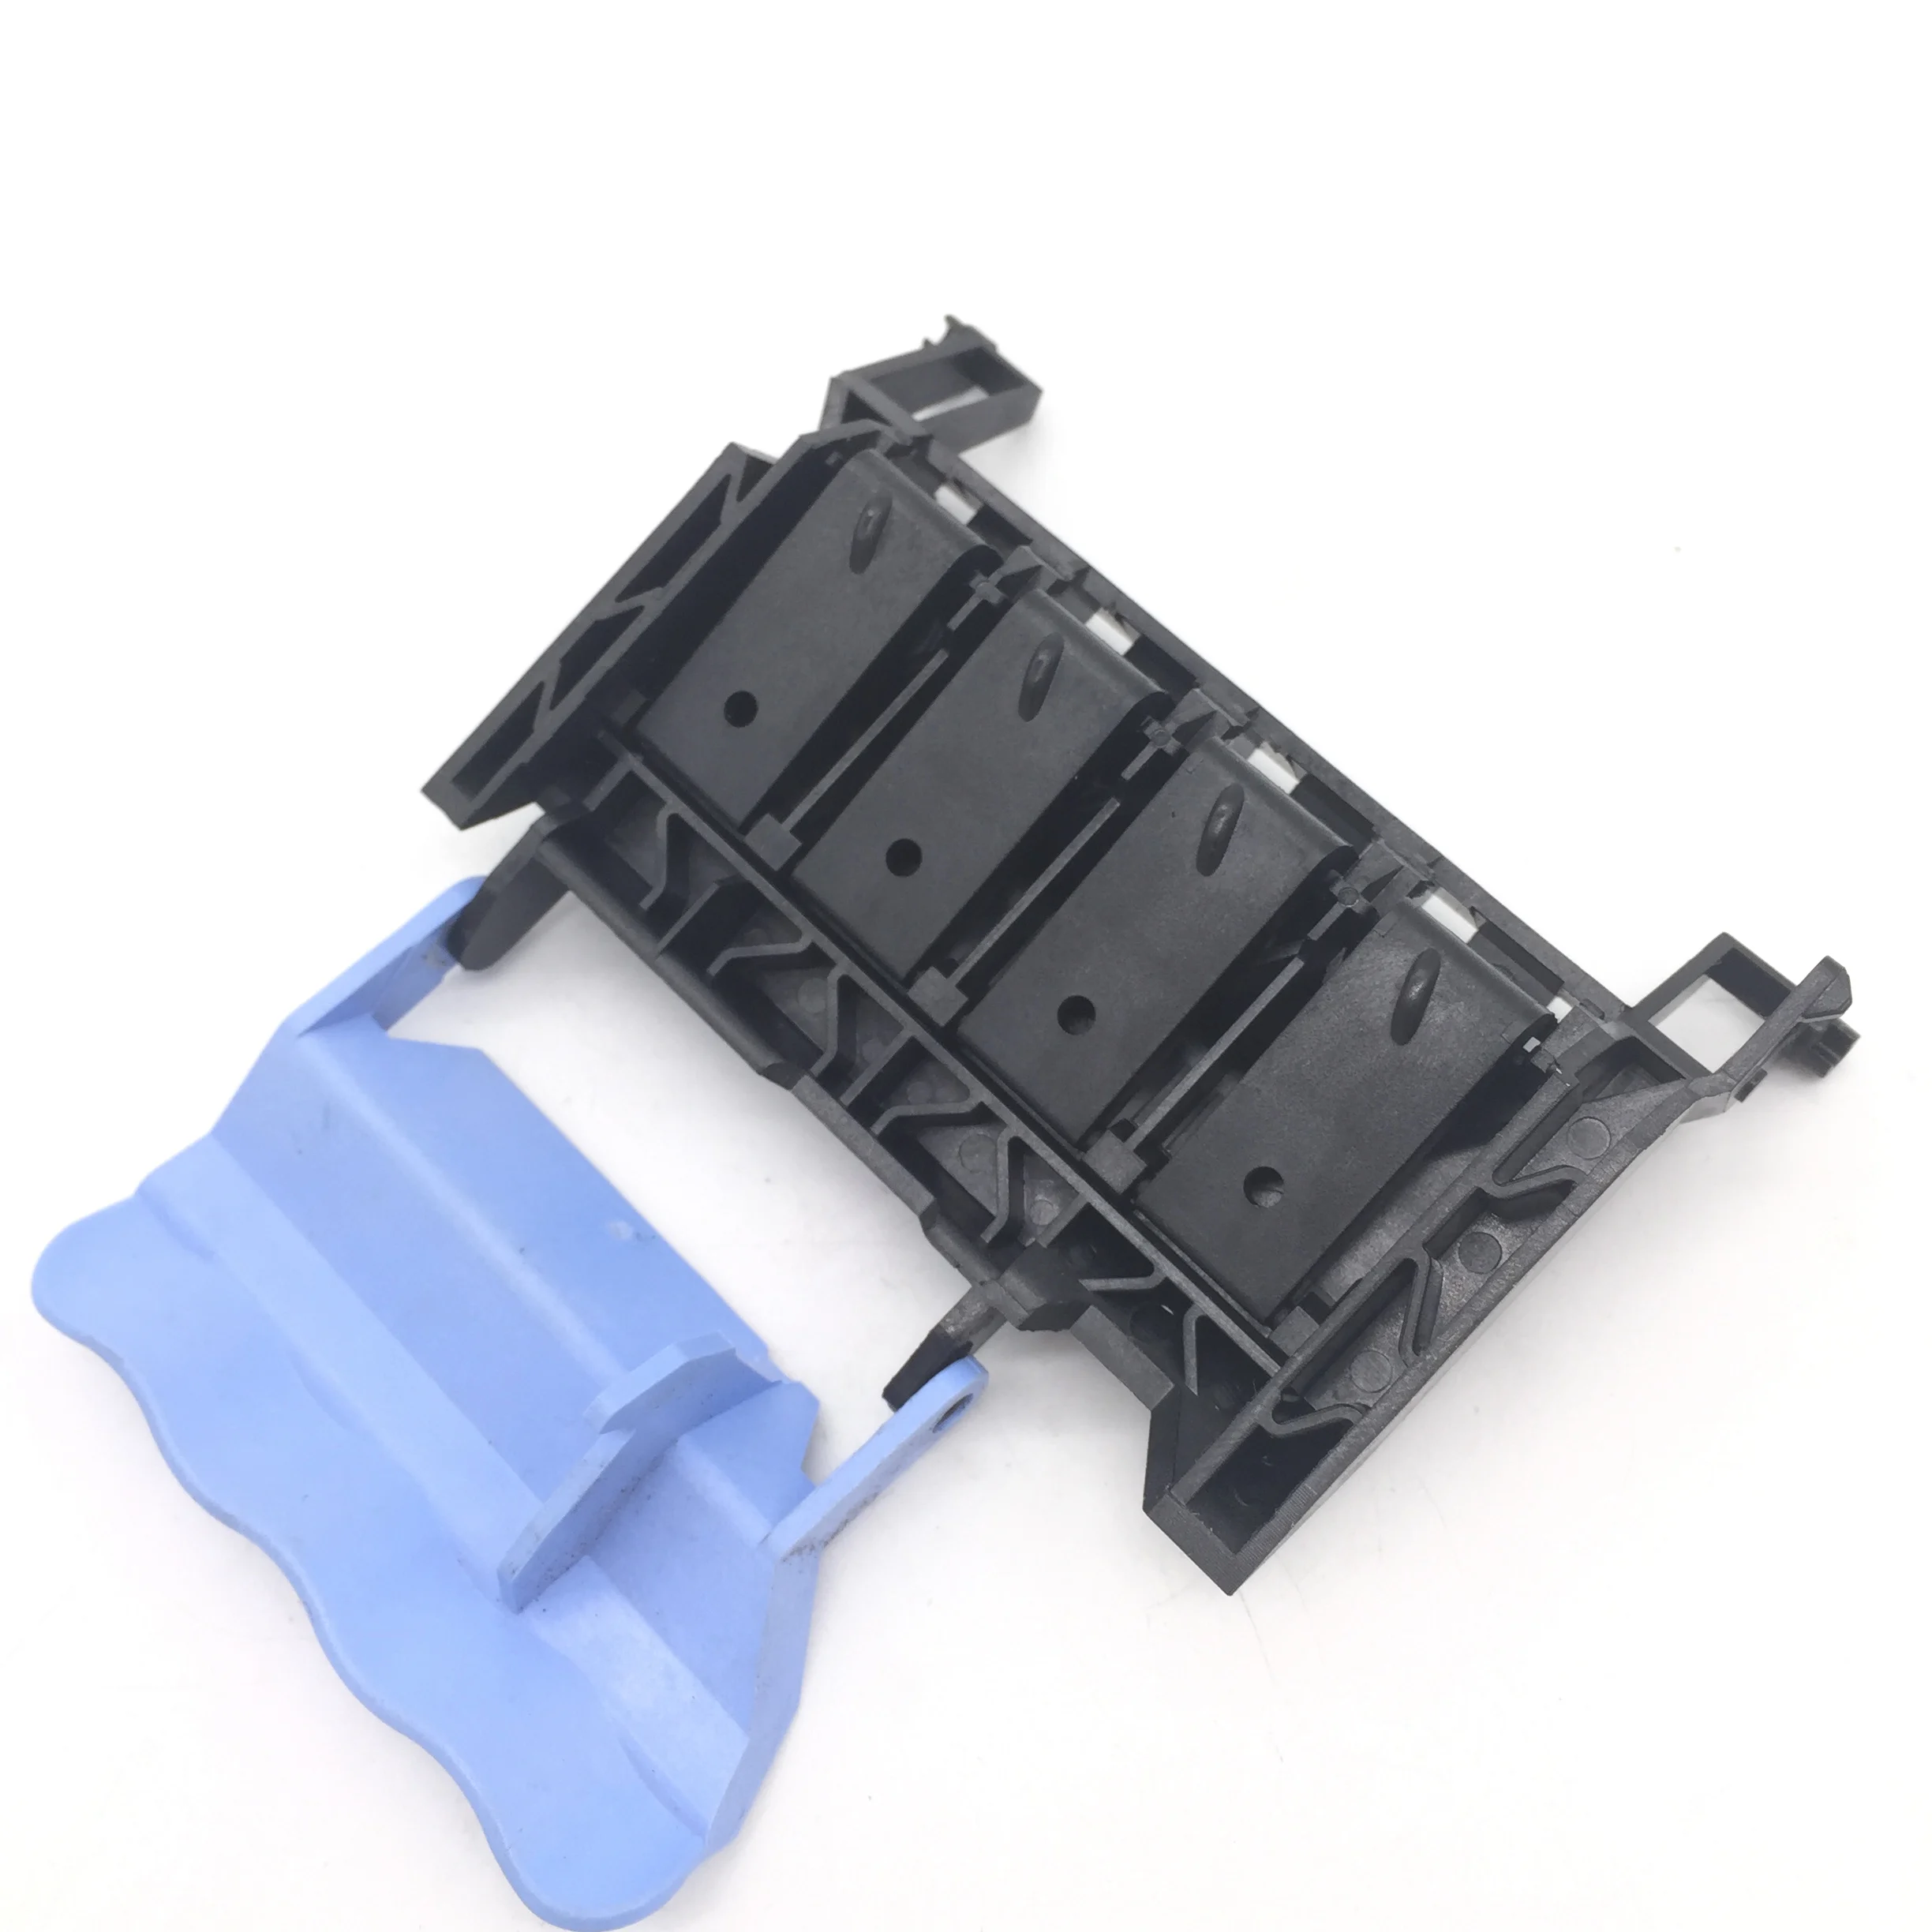 

Carriage-Cover(Black + Blue) for HP DesignJet 500 510 800 800PS 510 510PS C7769 C7779 PRINTER